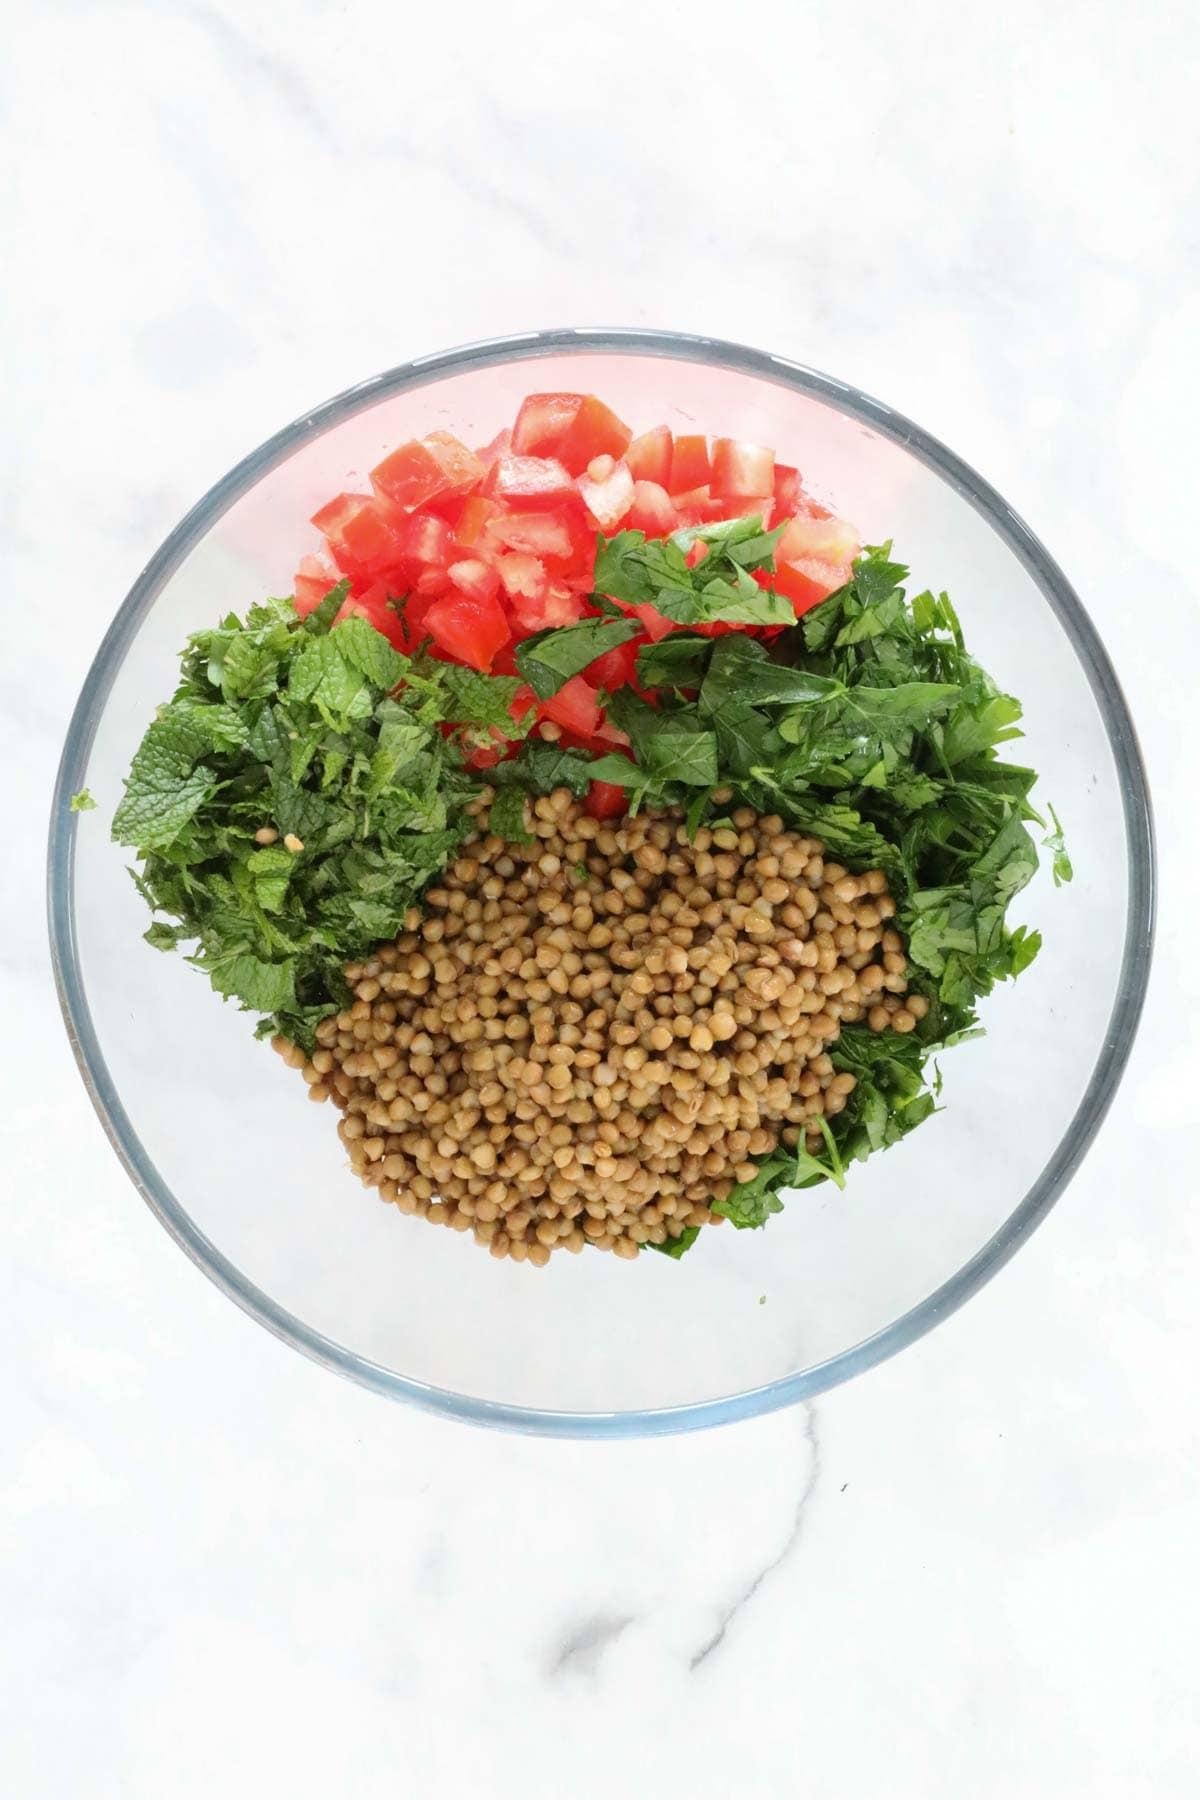 The lentil salad ingredients placed in a large bowl.